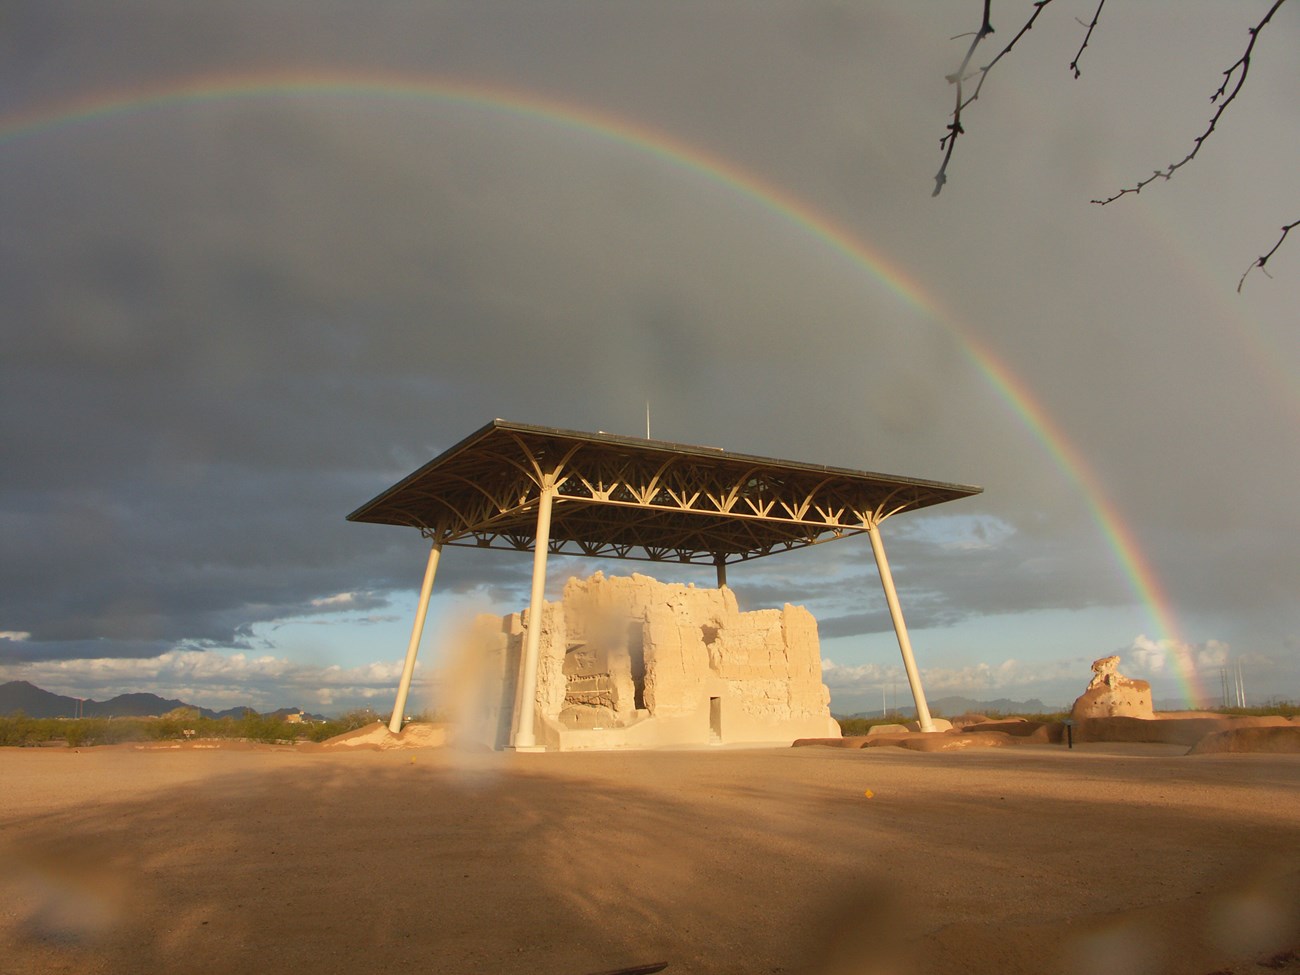 clearing skies reveal and double rainbow over the Casa Grande Great House